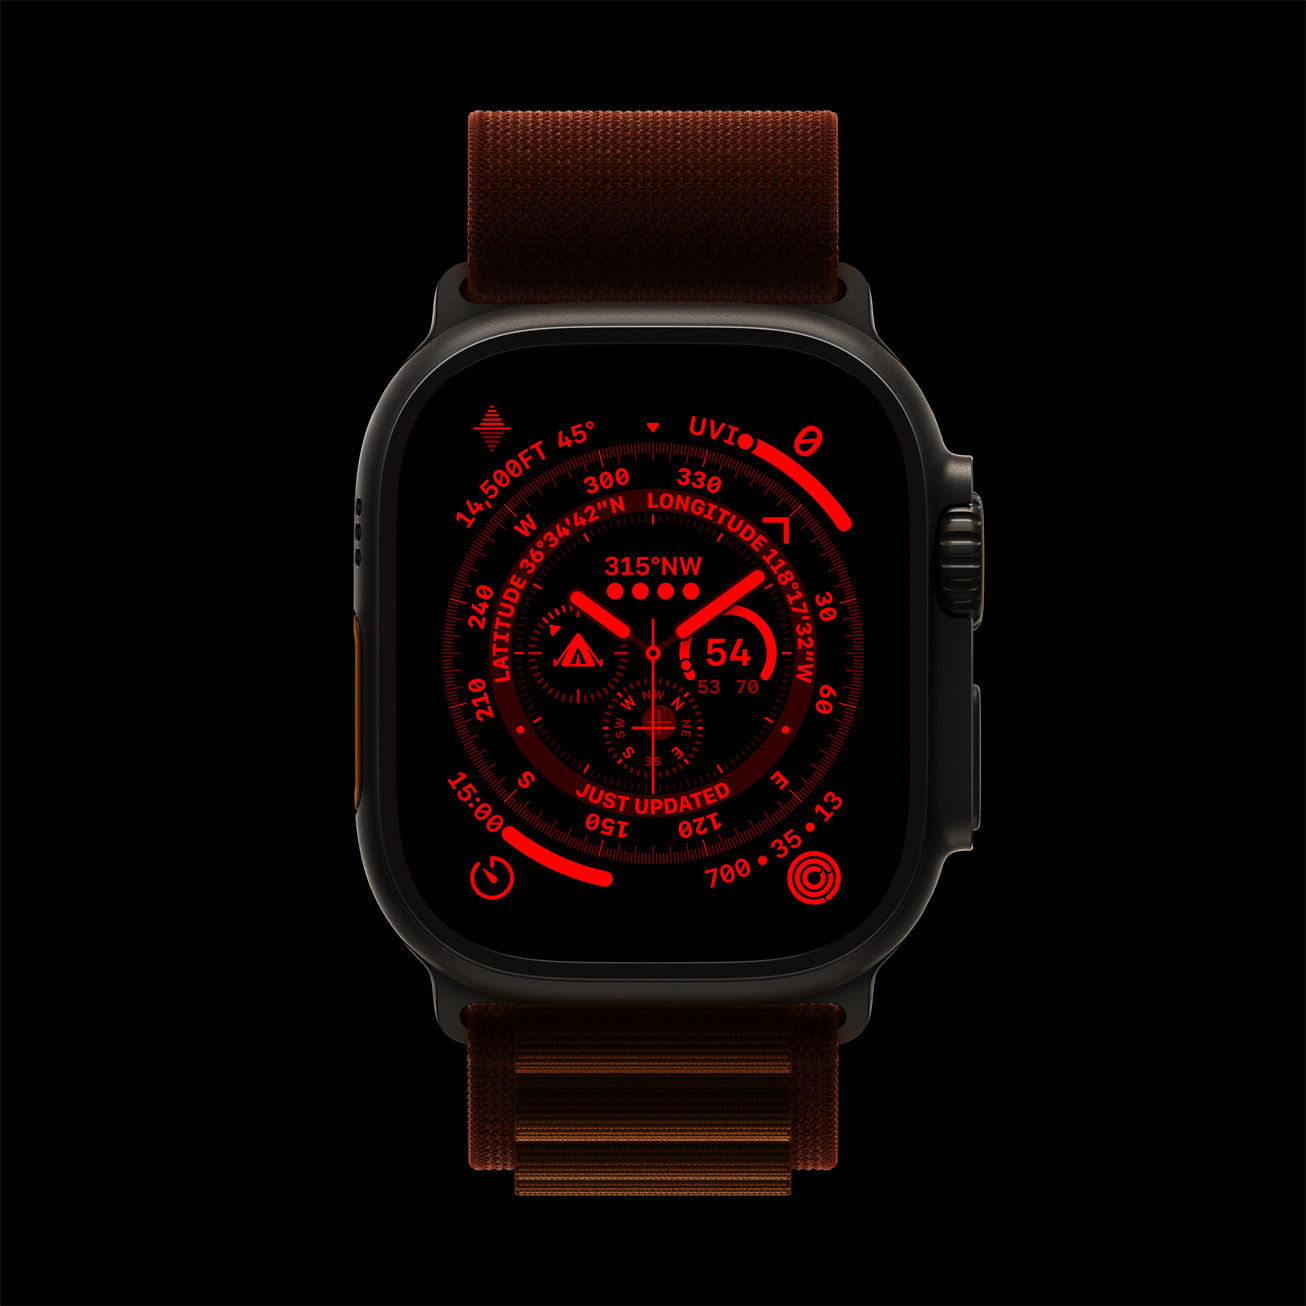 New Apple Watch Ultra Unveiled with Exclusive Watch Face and Bands